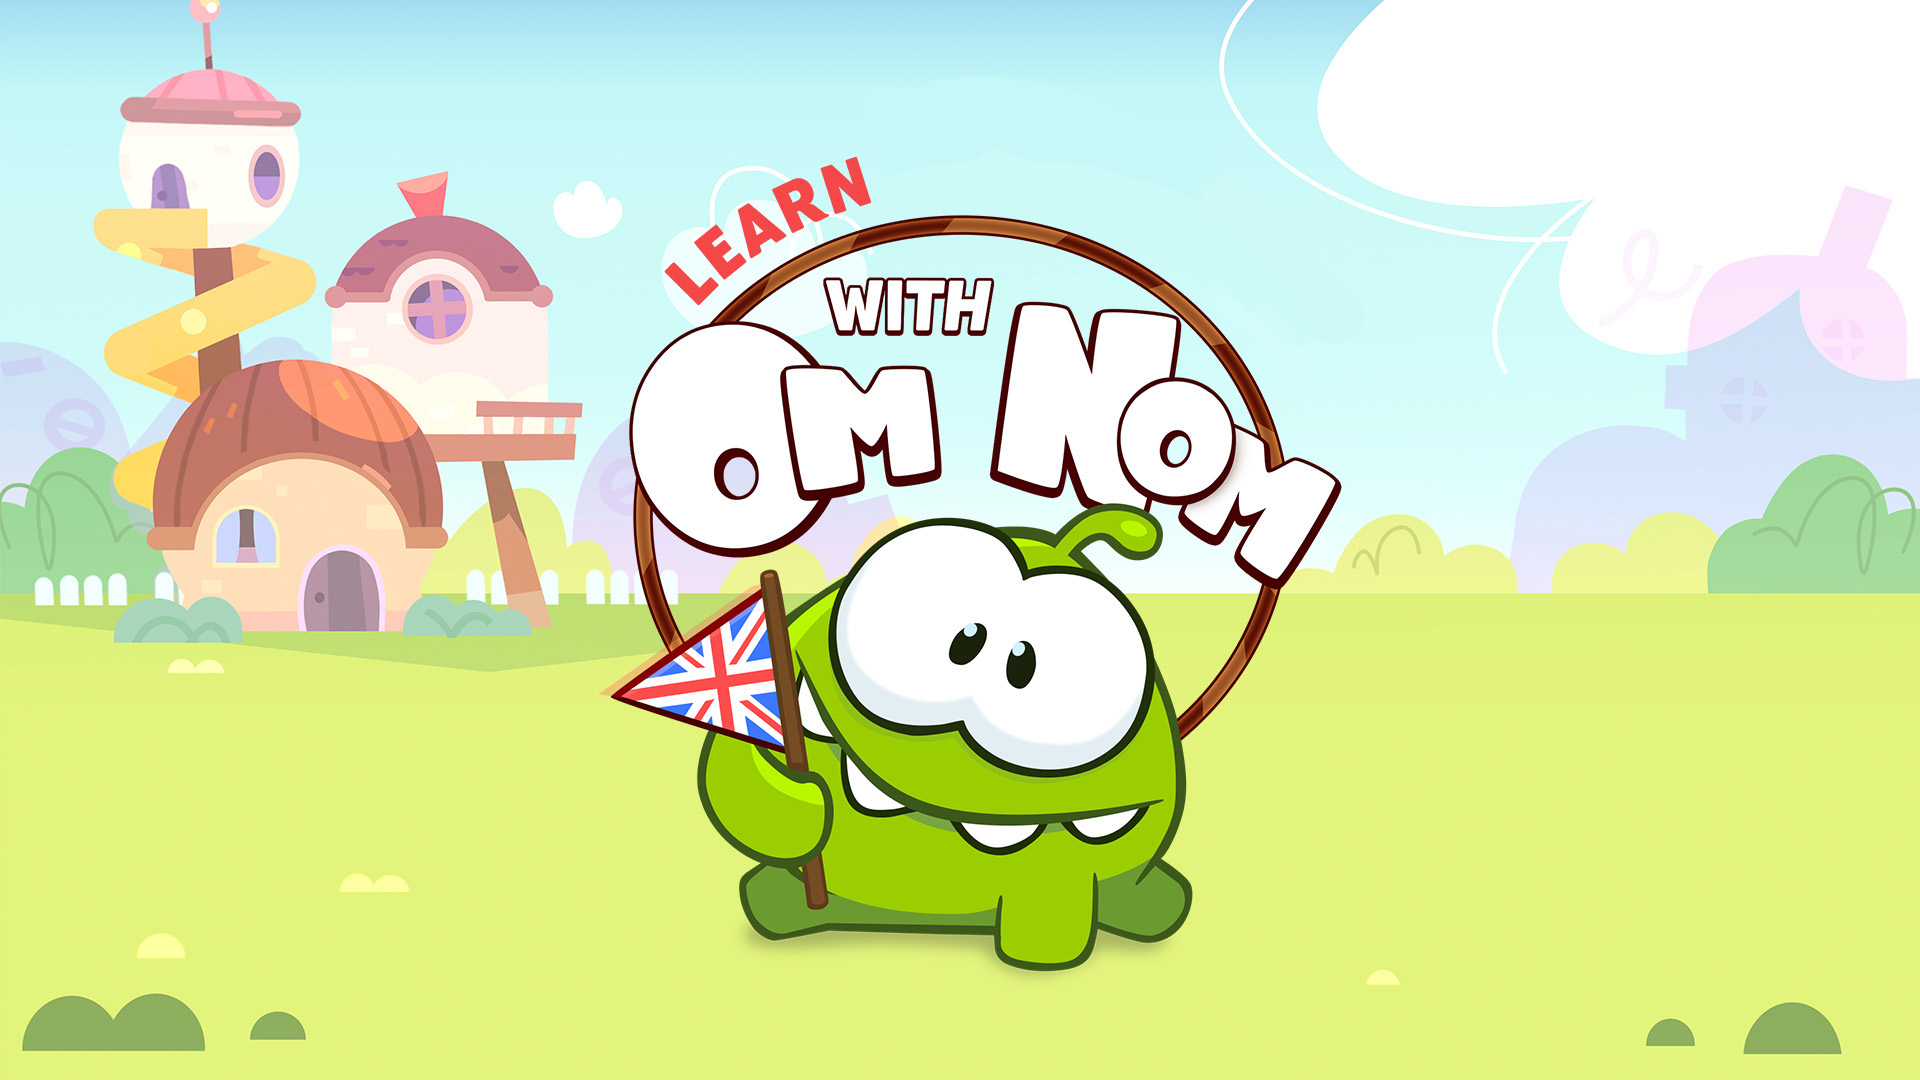 Learn with Om Nom